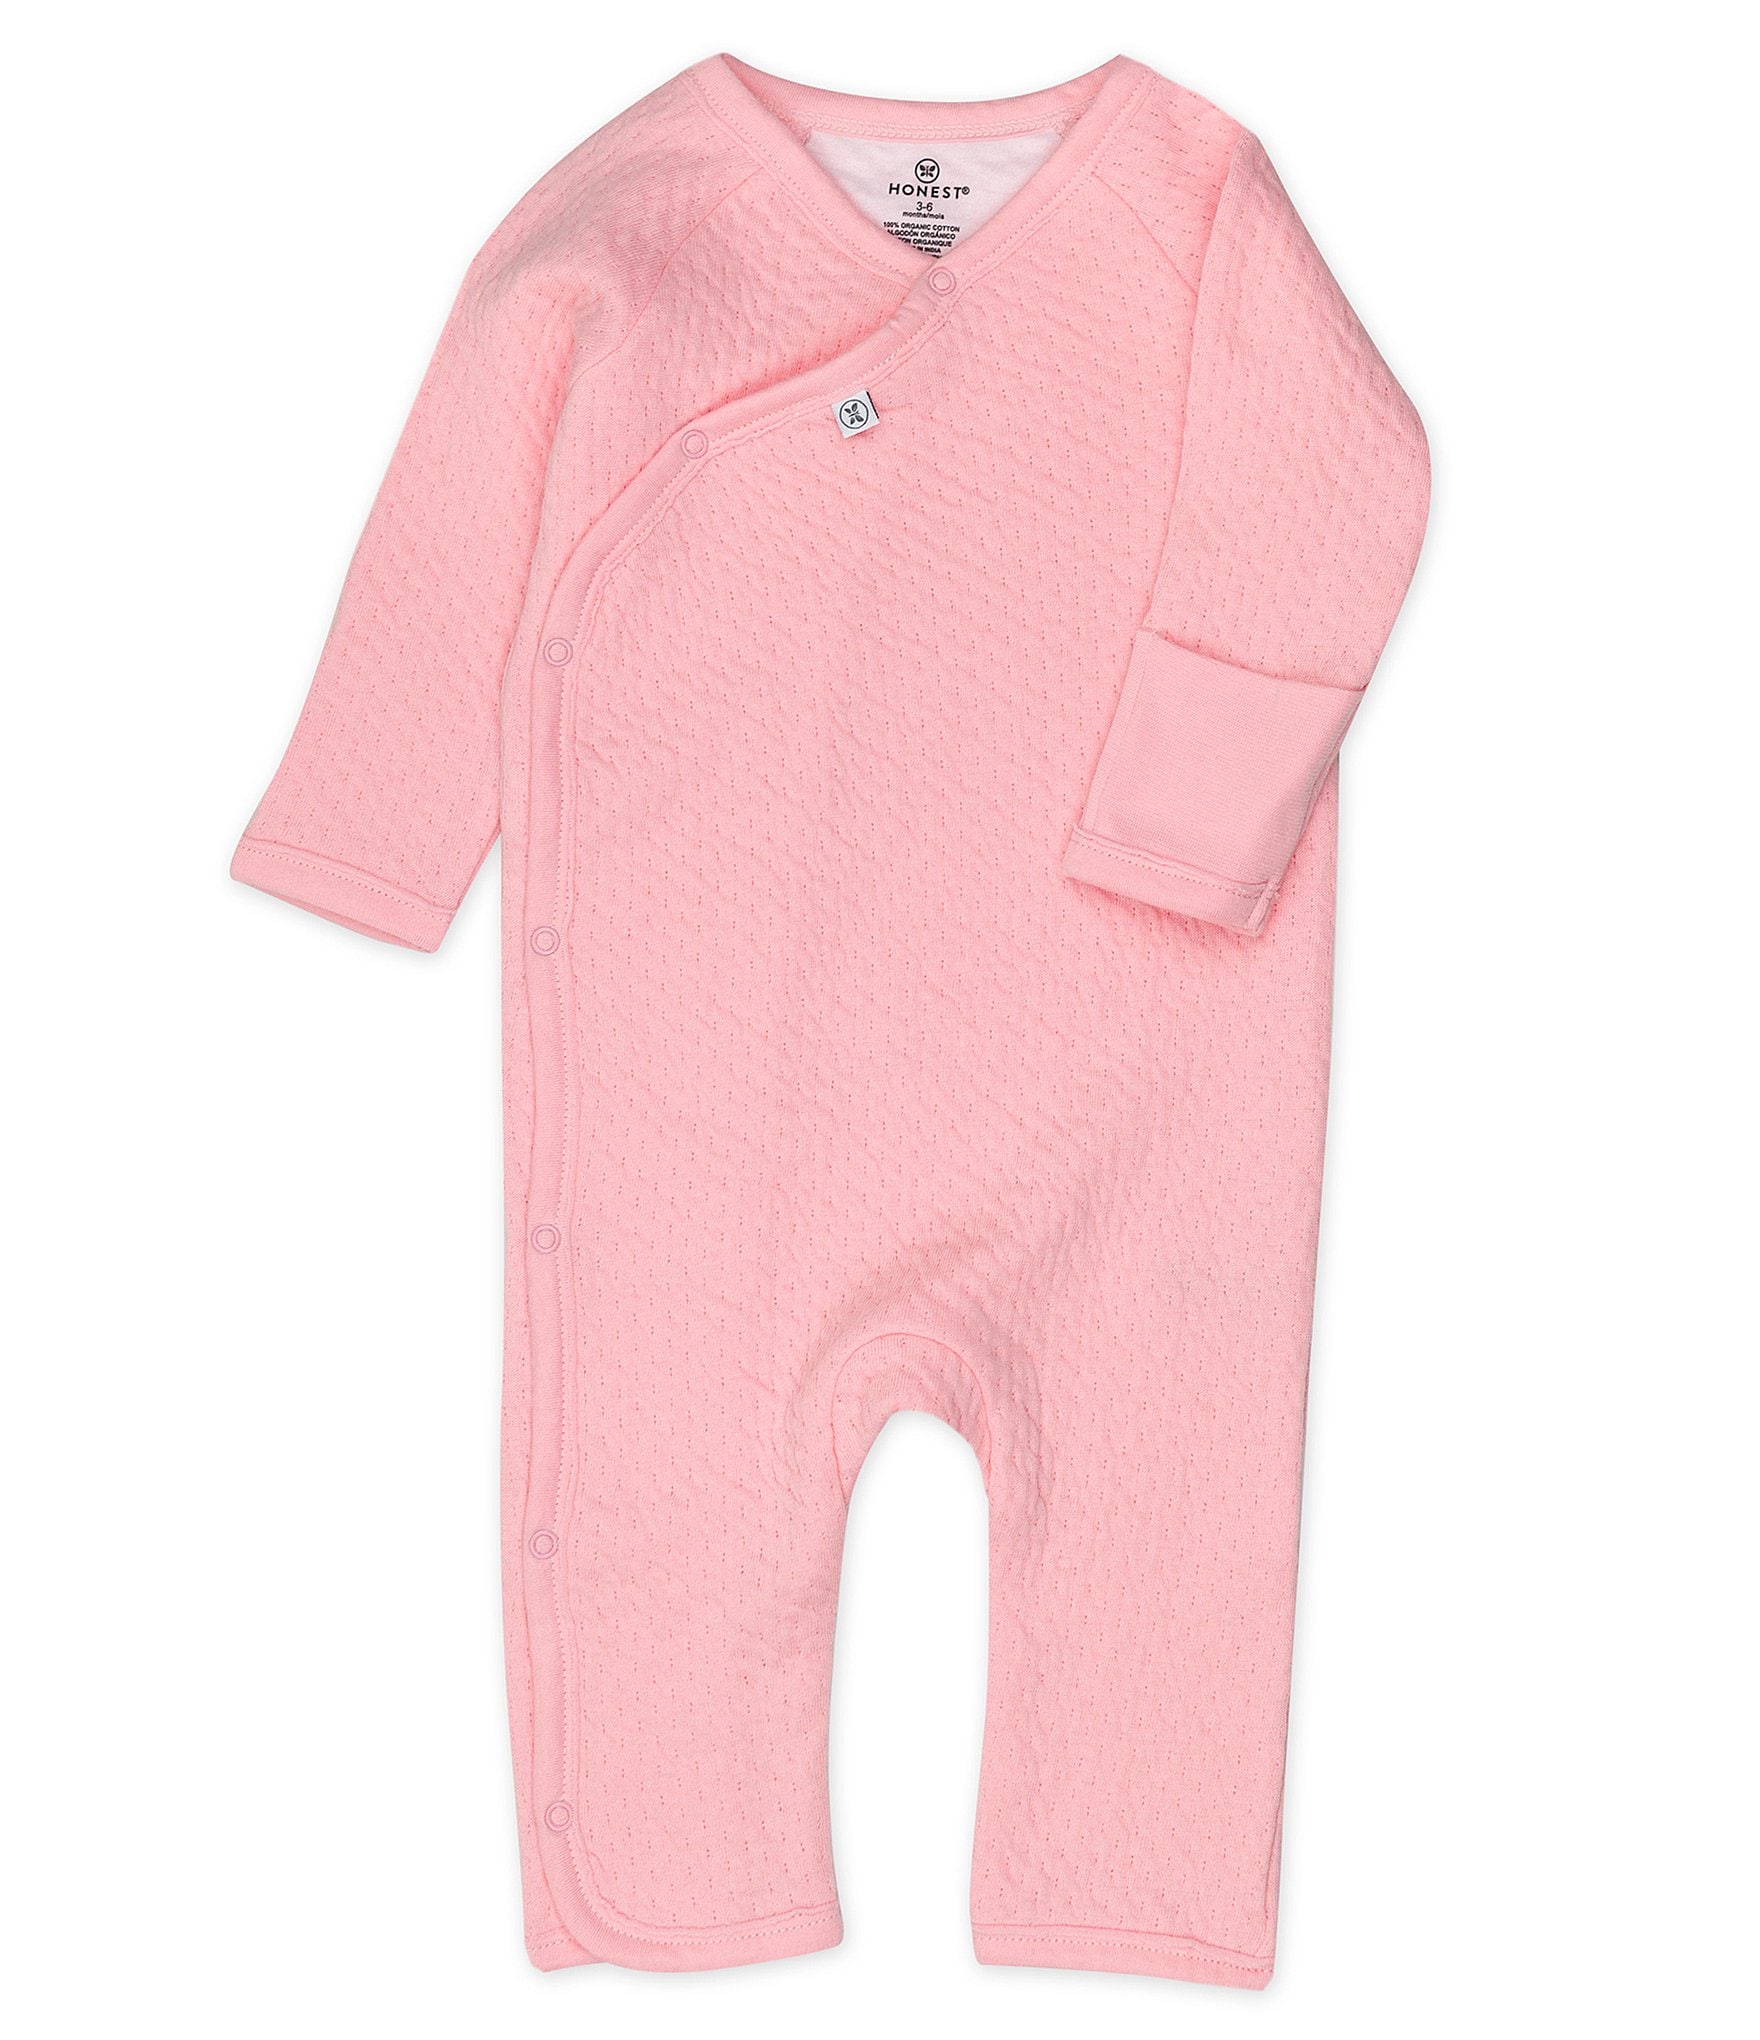 Infant clothing maker recalls garments with snaps and prongs that